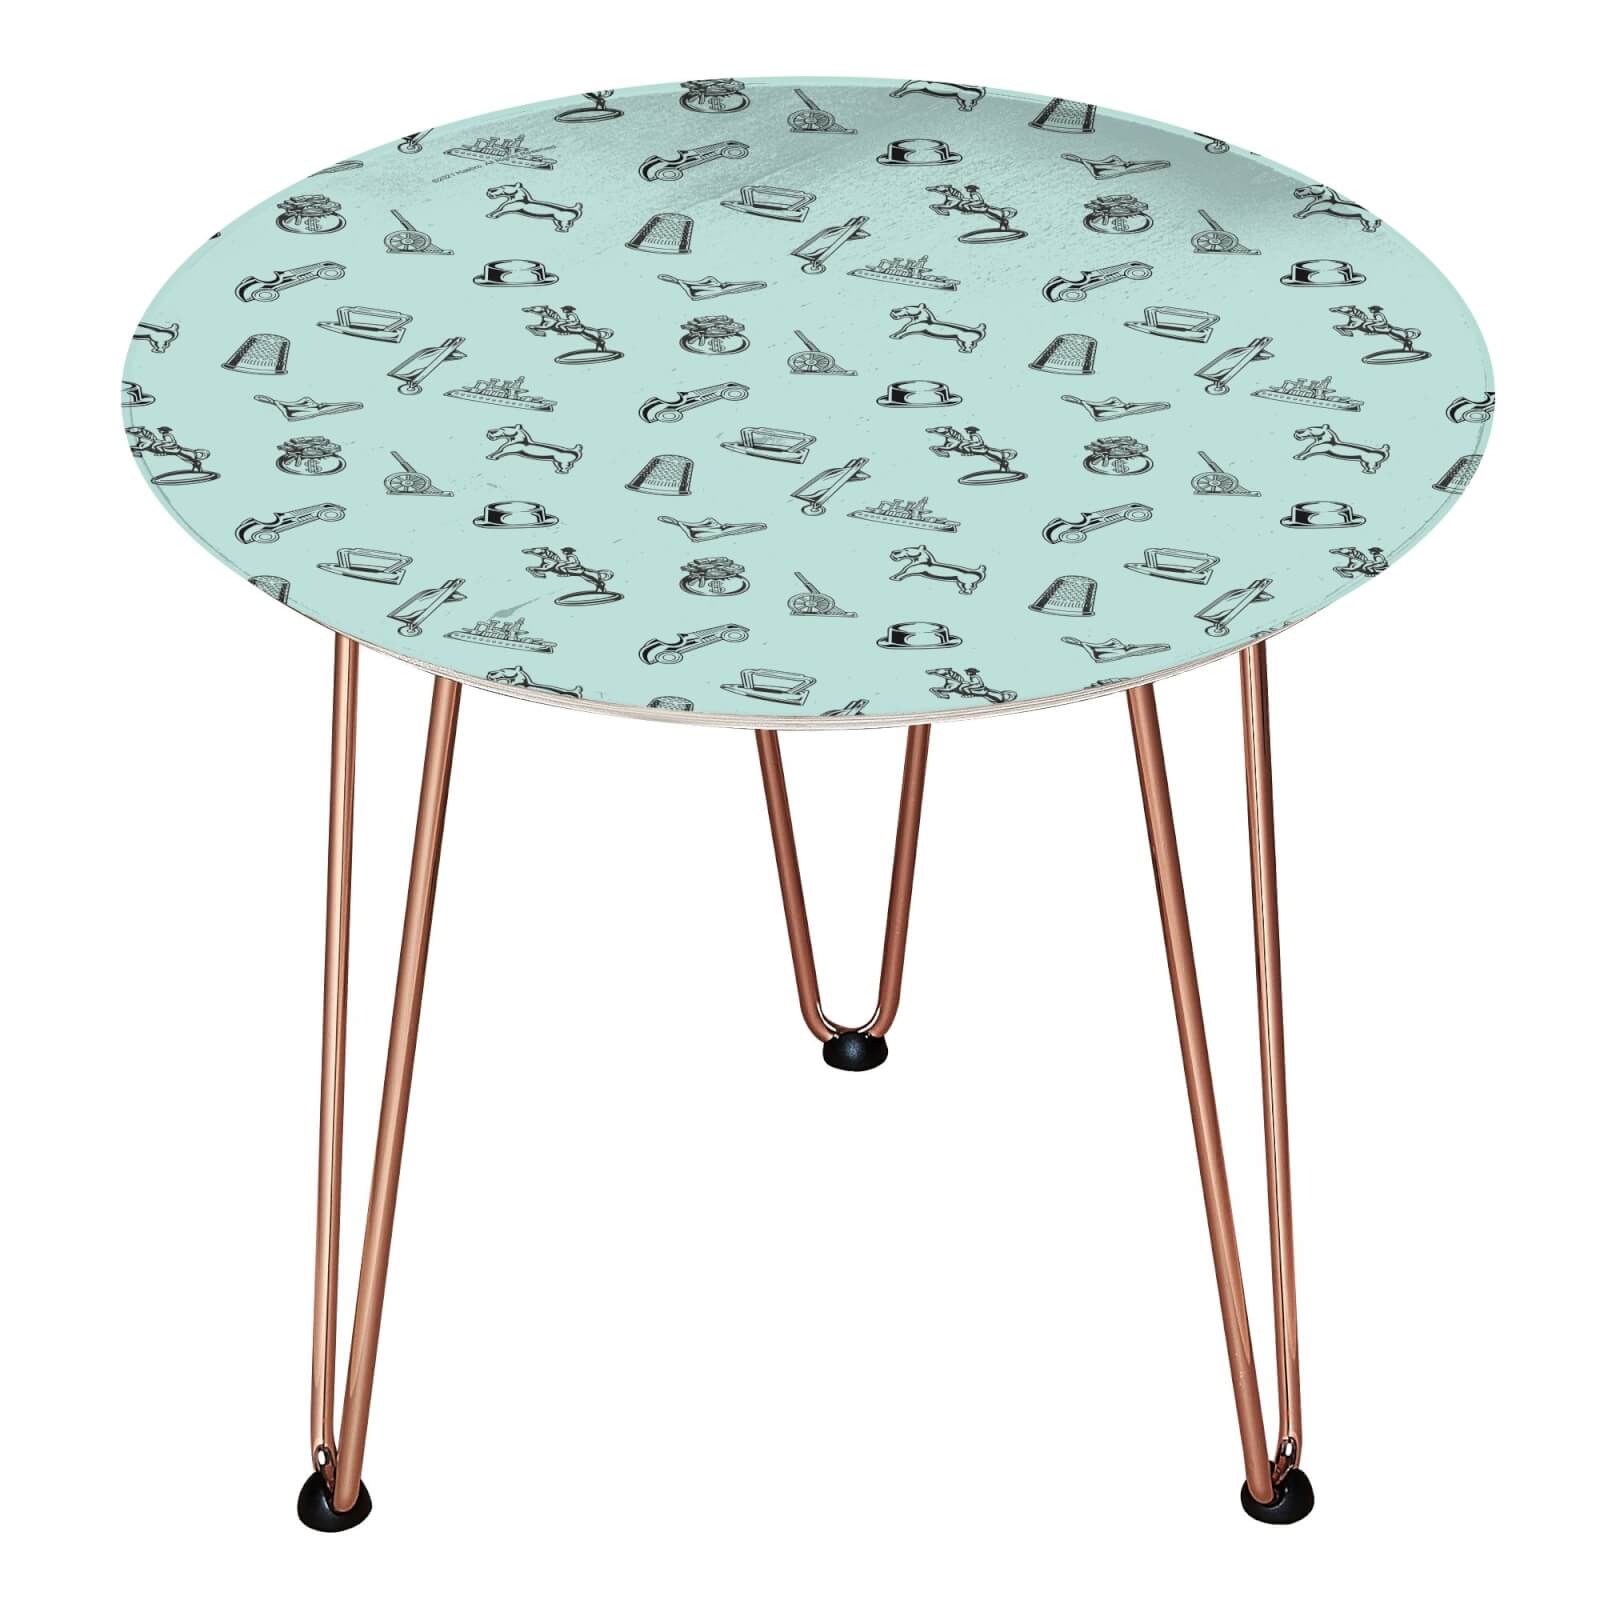 Decorsome Monopoly Figures Wooden Side Table - Rose gold